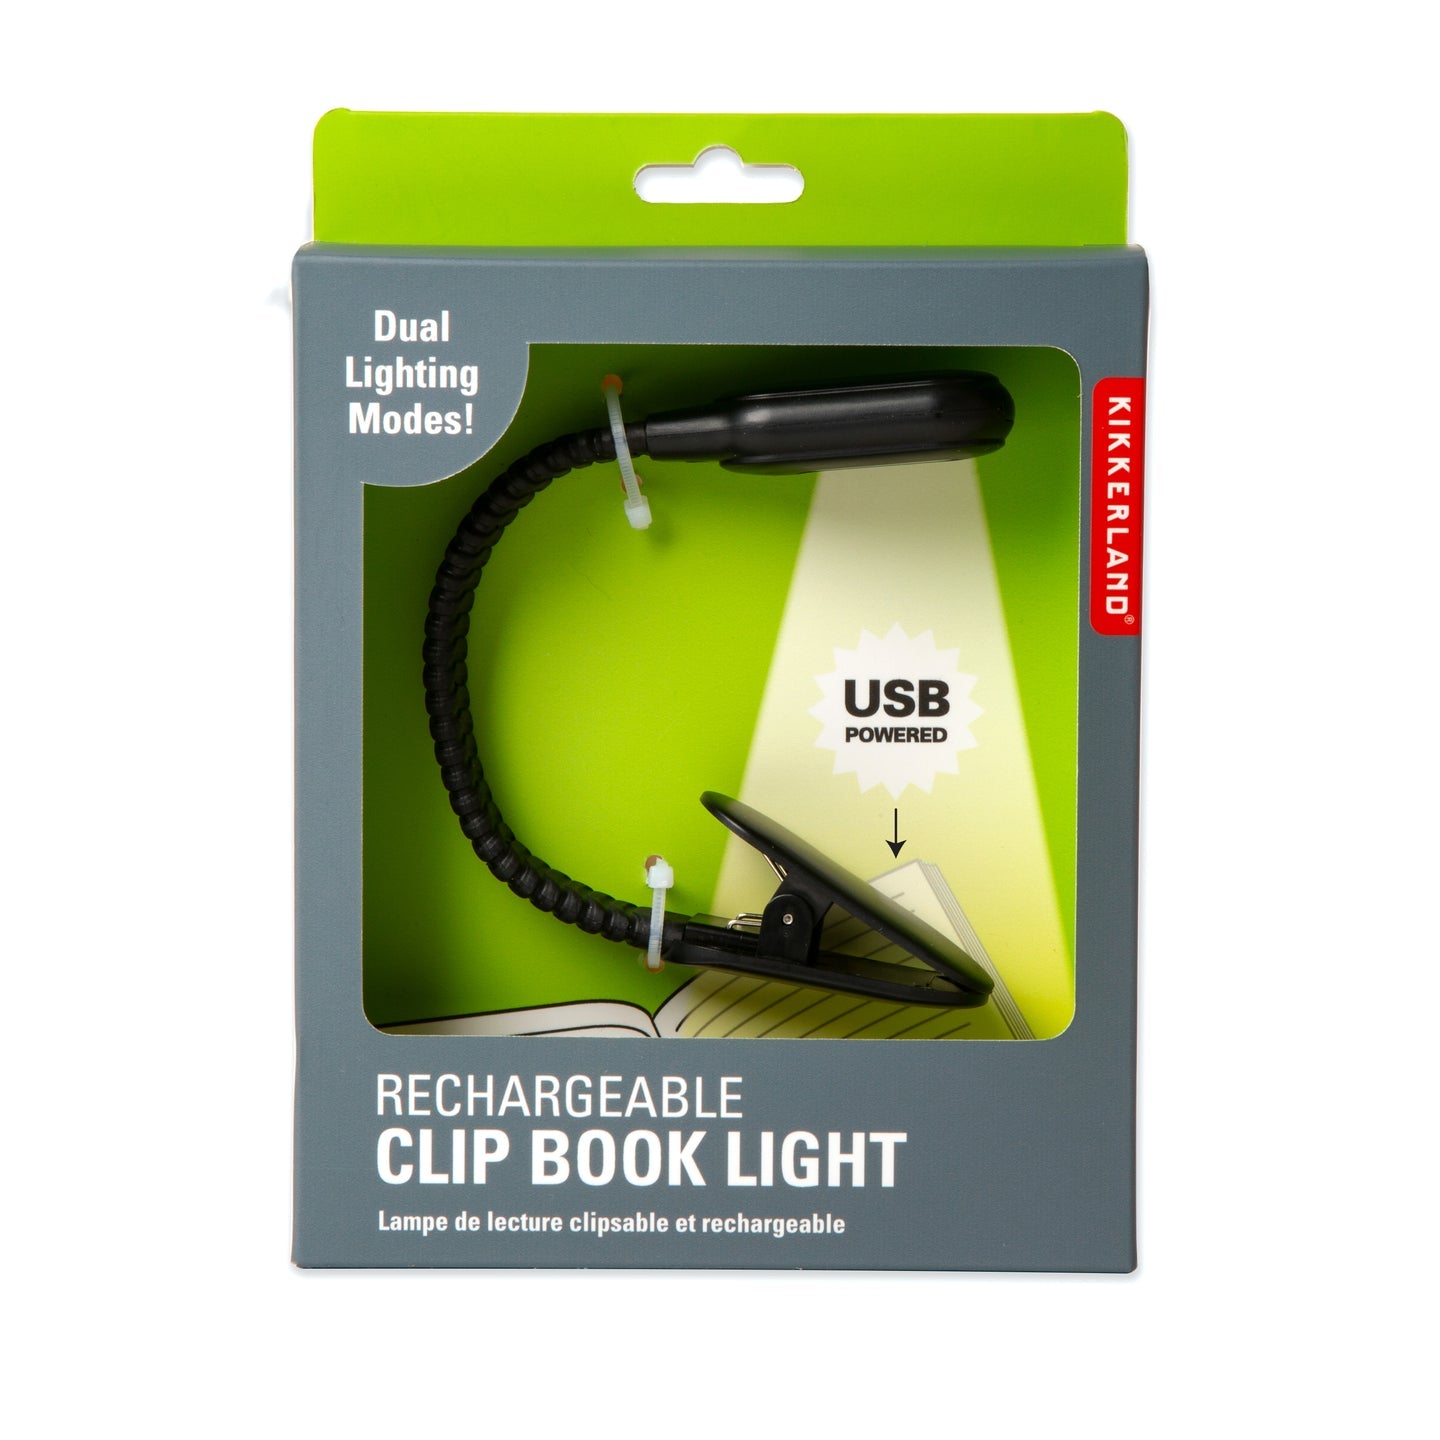 RECHARGEABLE CLIP BOOK LIGHT